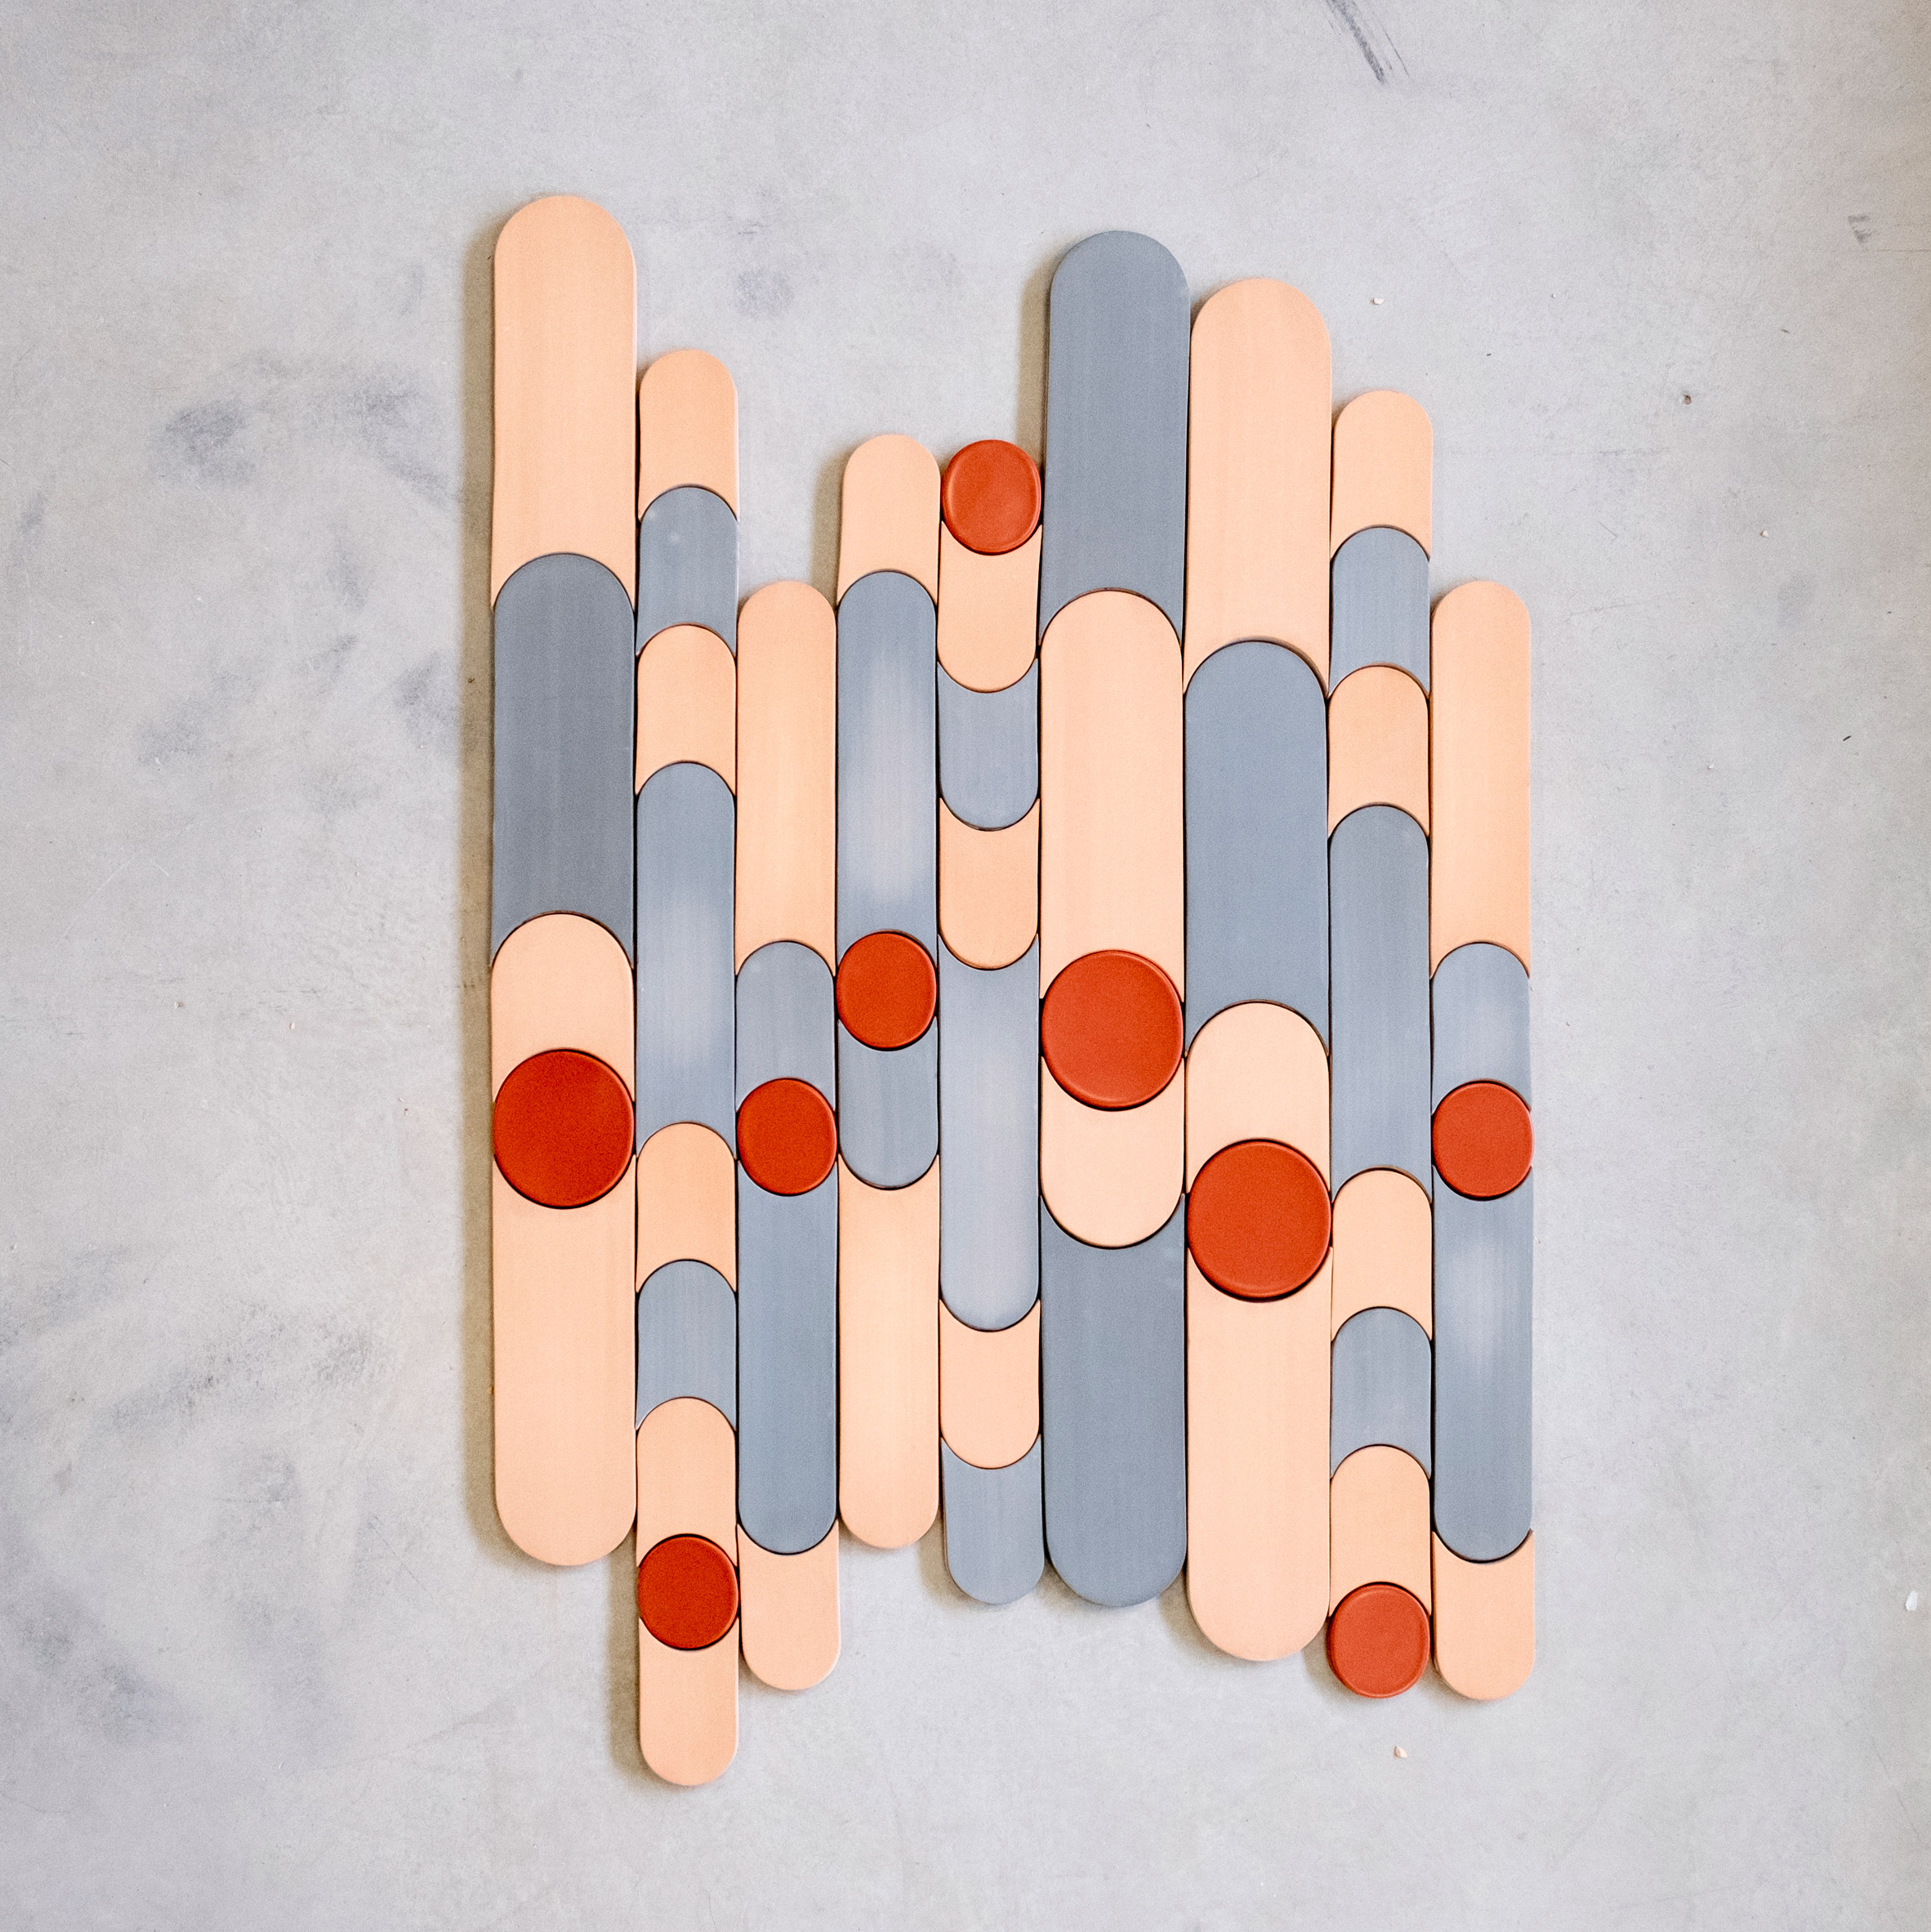 Circle and rounded Parquet Bisque tiles by New Terracotta in grey, peach and red